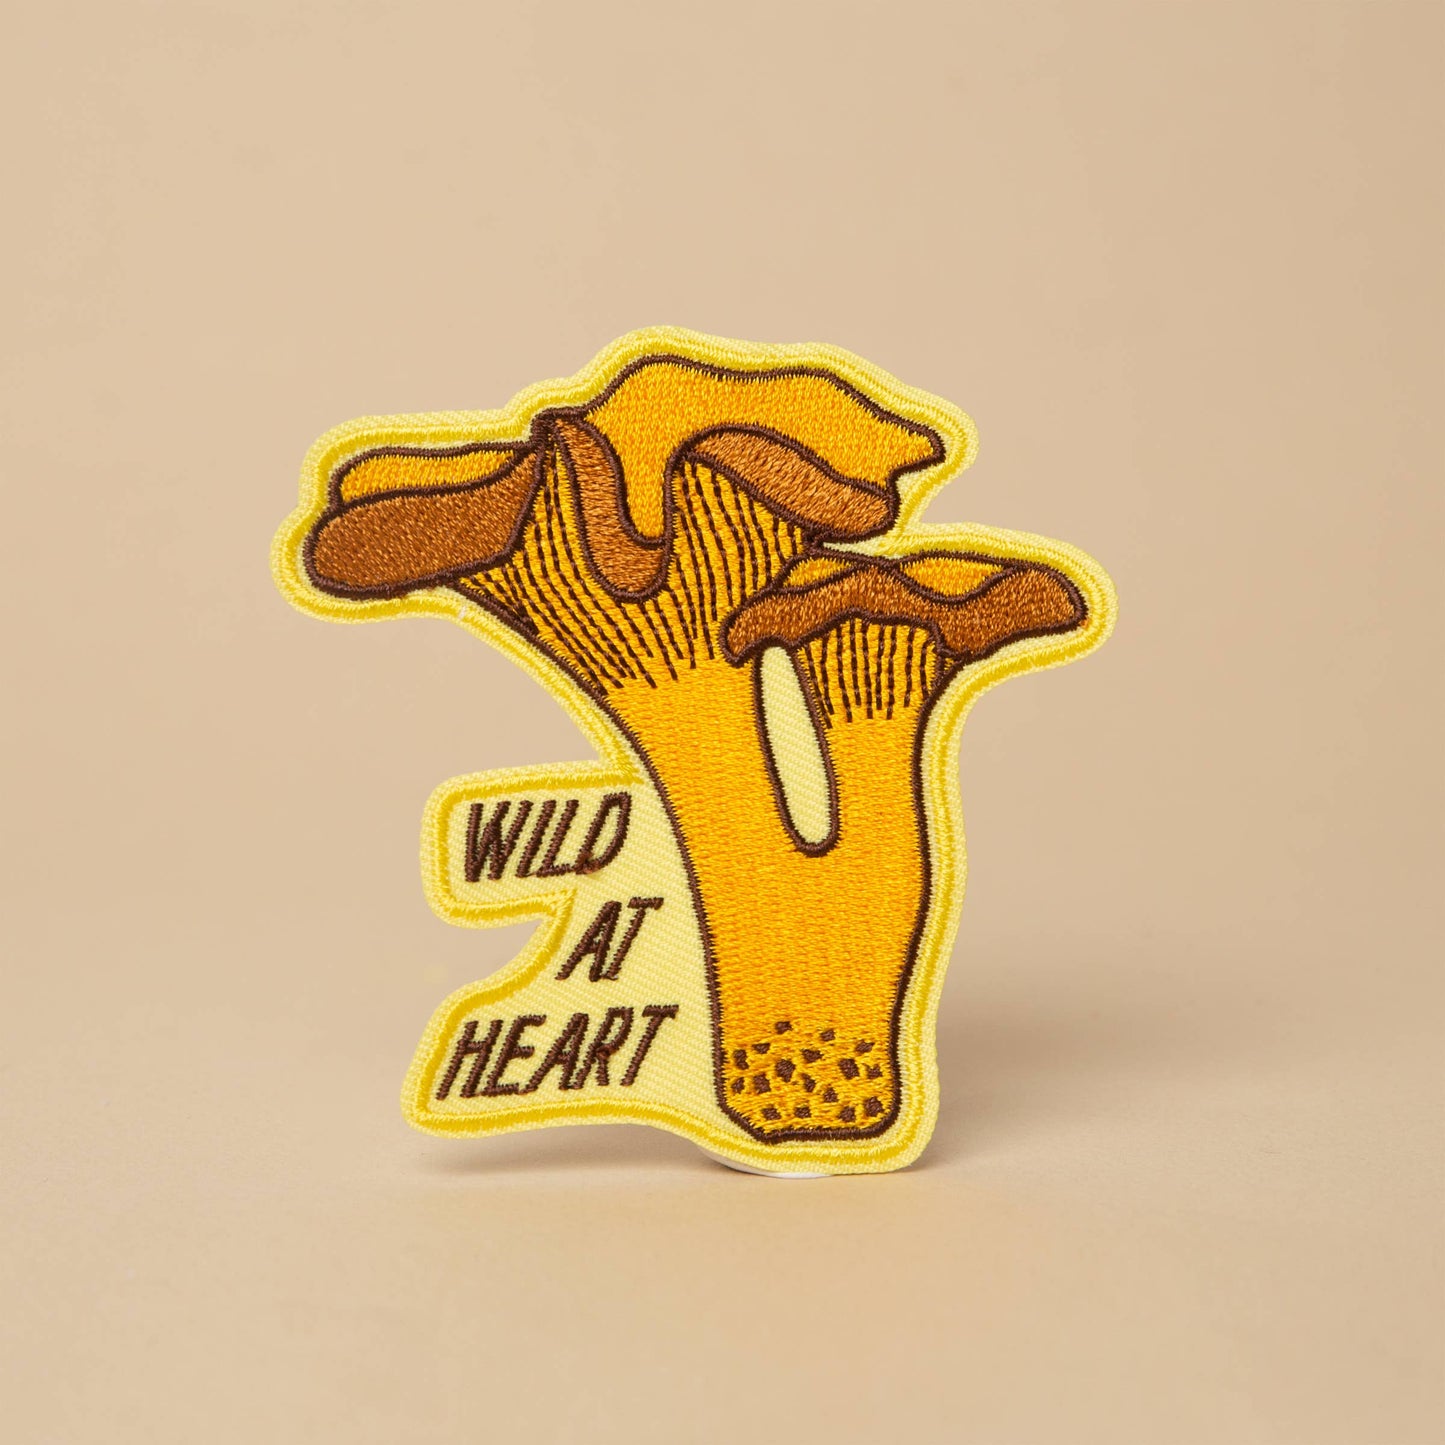 Tender Loving Empire - Wild at Heart Patch